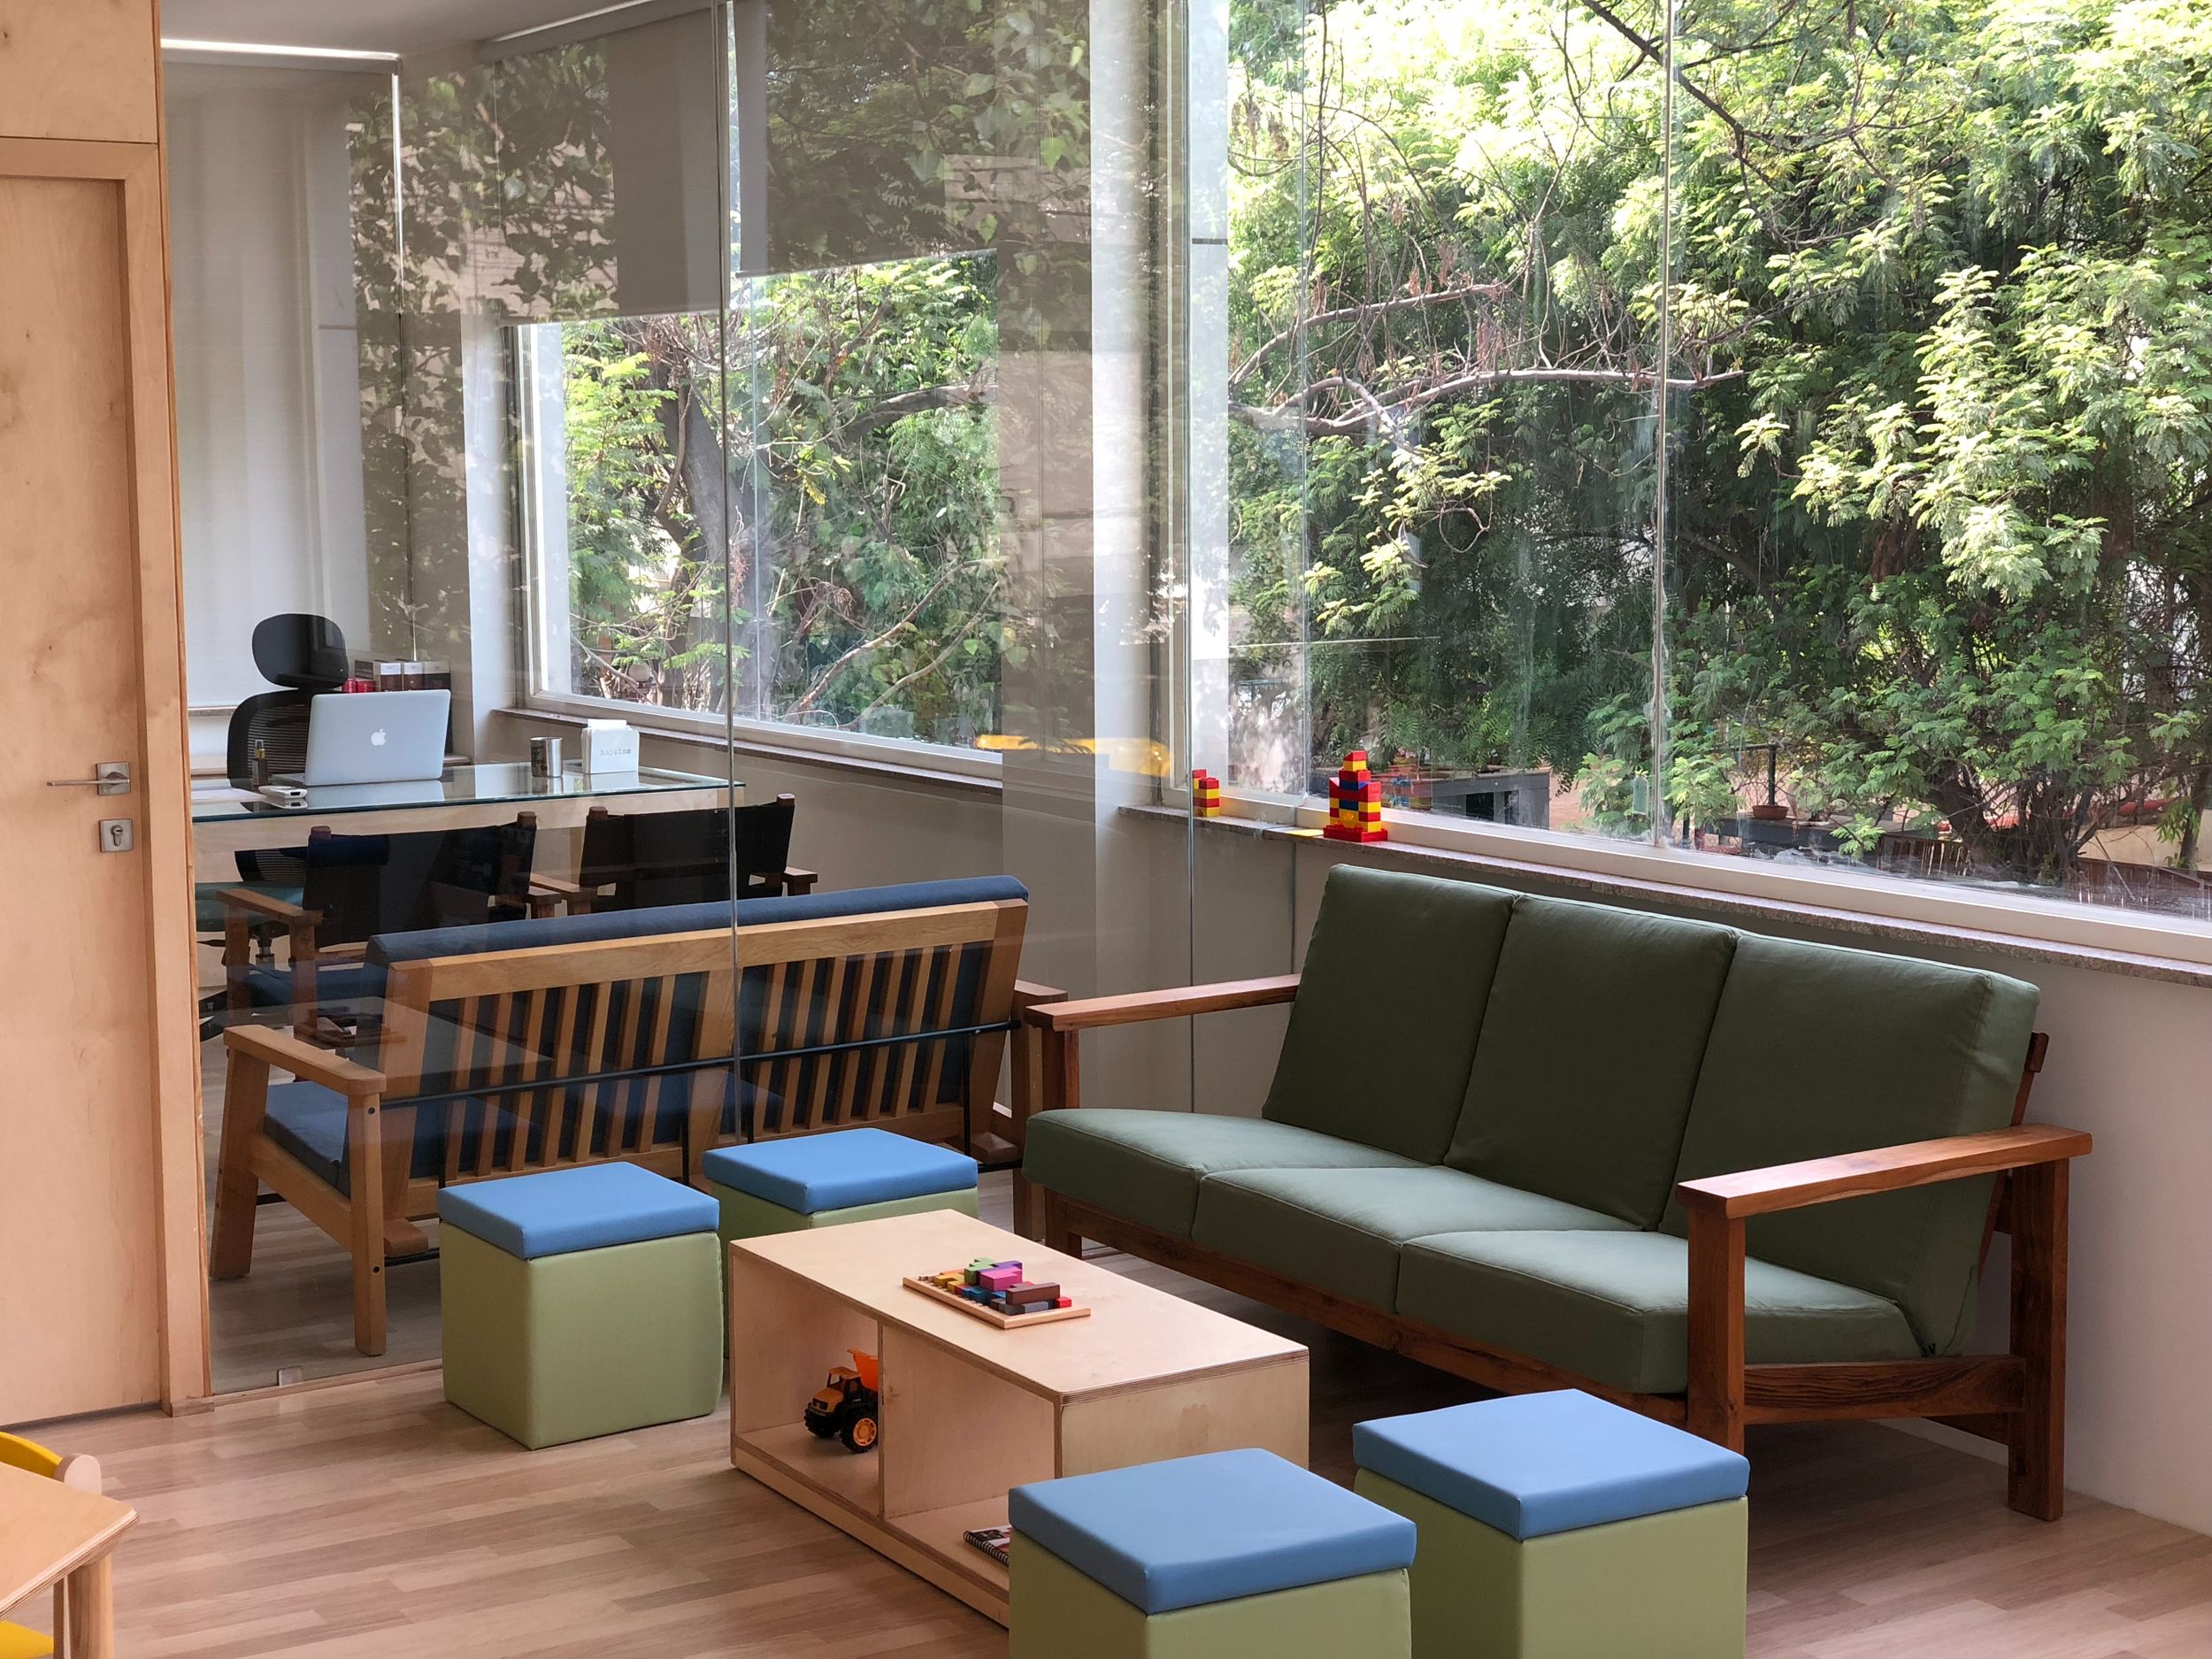 Doctors office waiting room with bright furniture and large windows